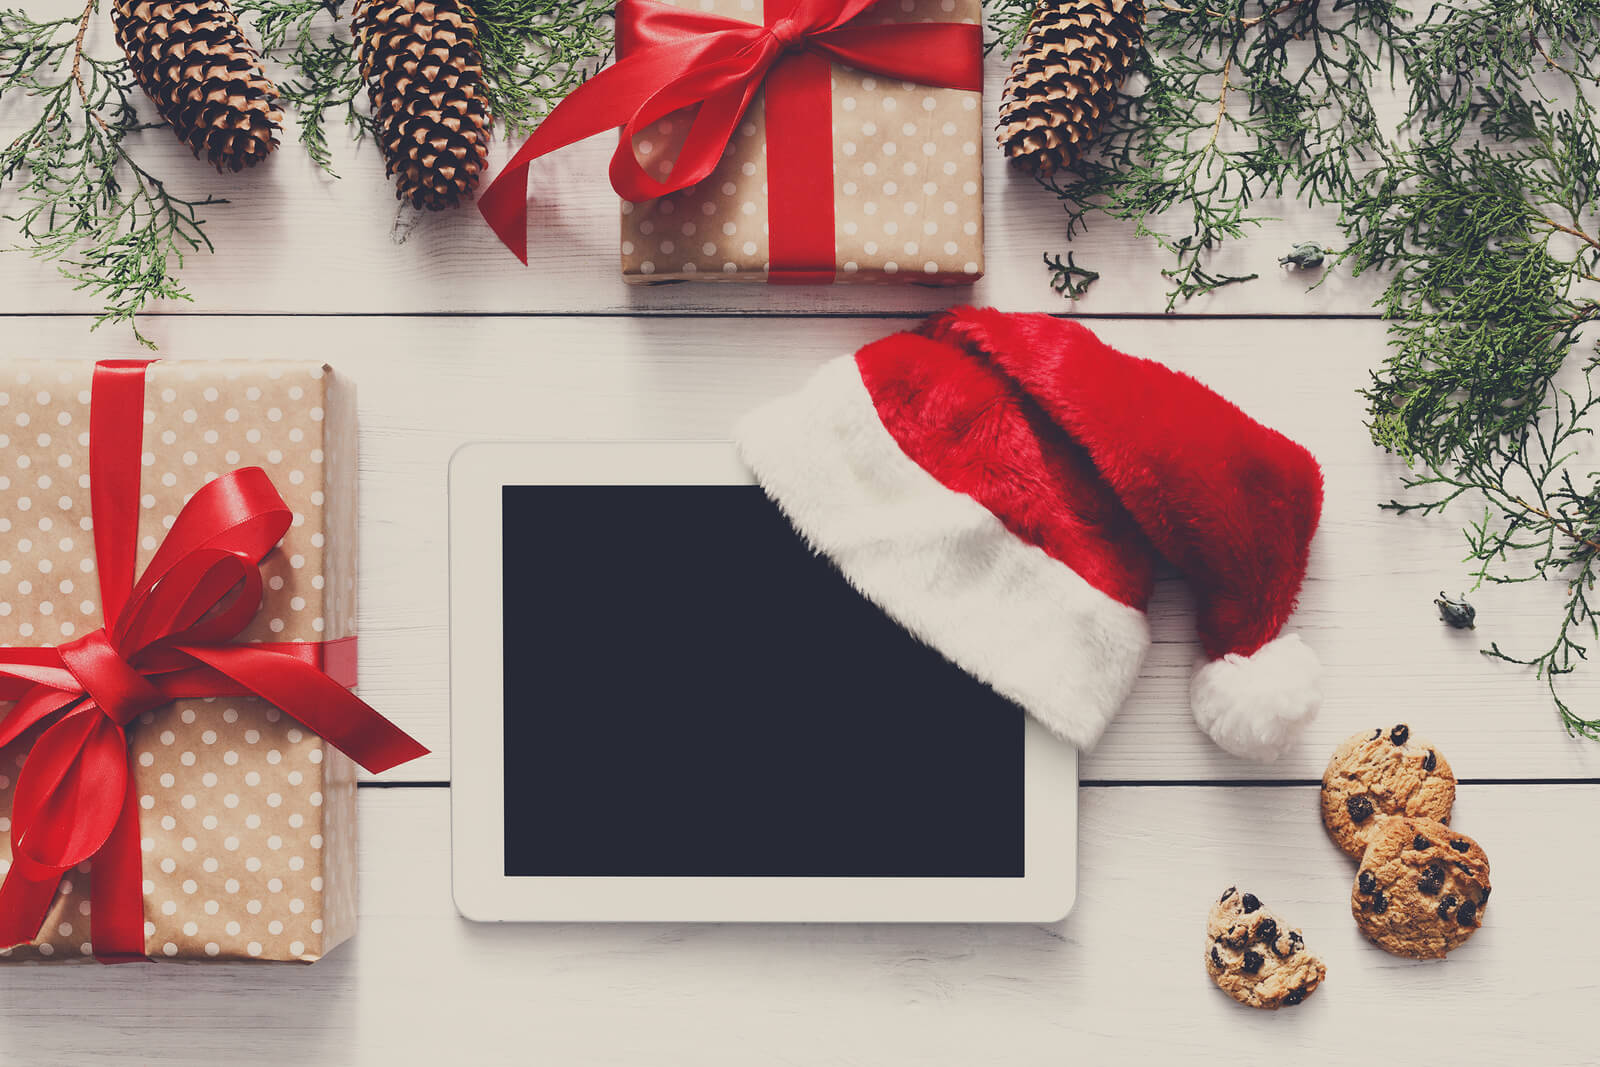 How to Attract More Customers this Holiday Season